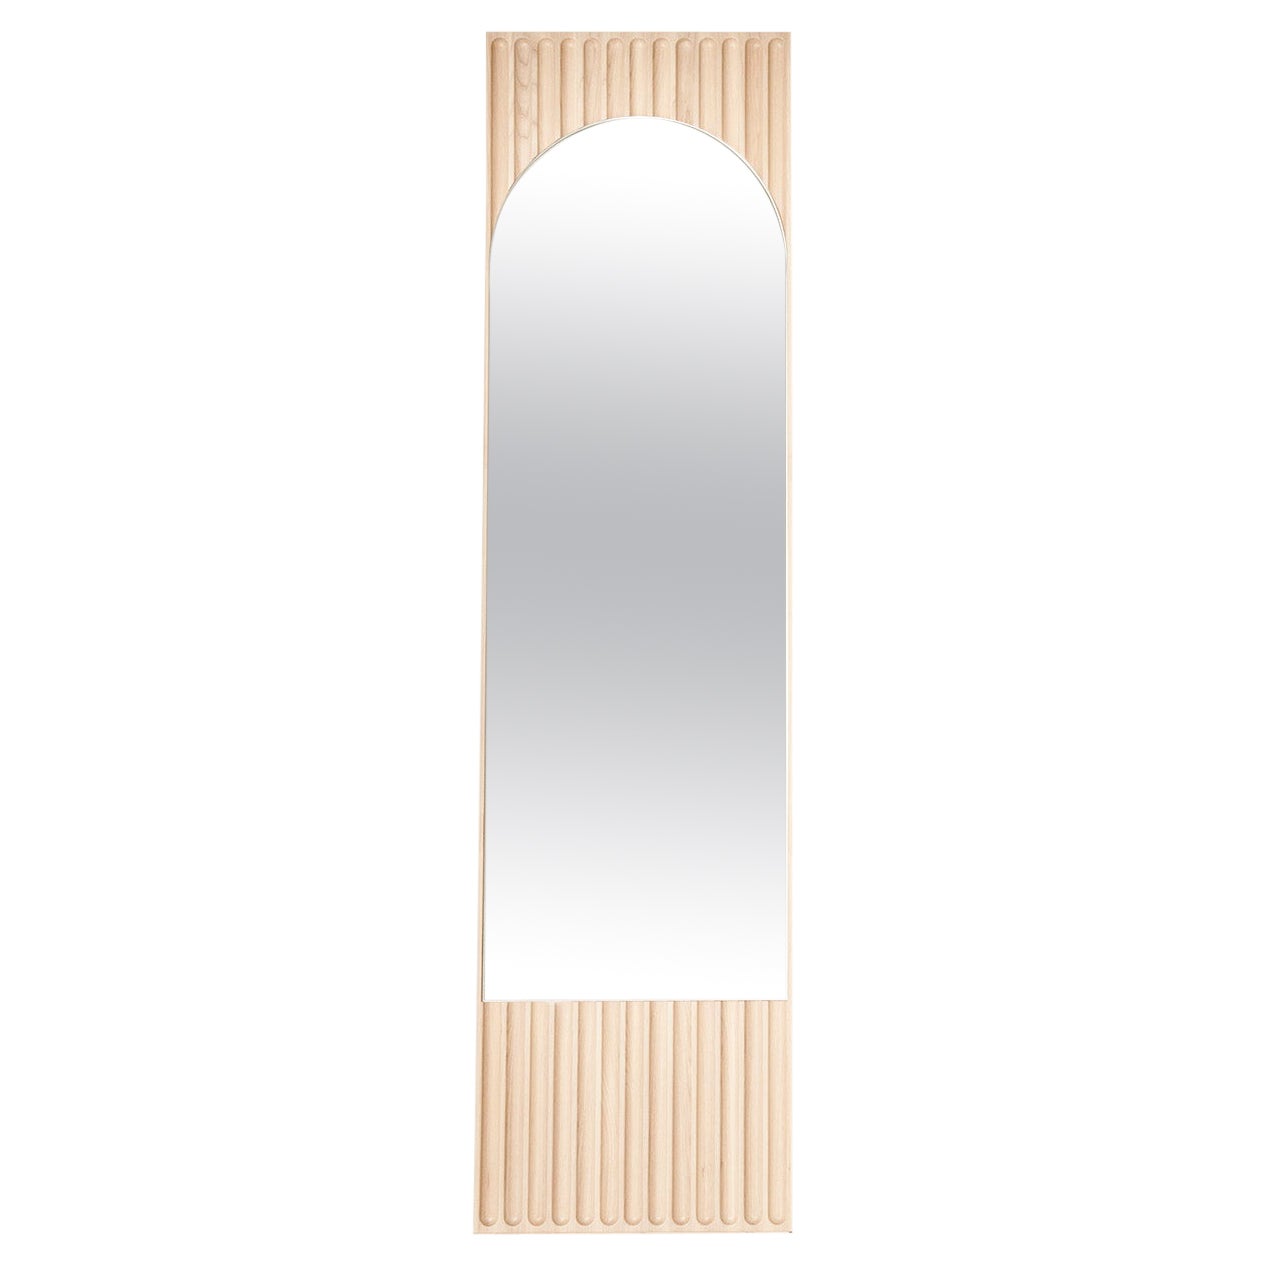 Tutto Sesto Solid Wood Rectangular Mirror, Ash in Natural Finish, Contemporary For Sale